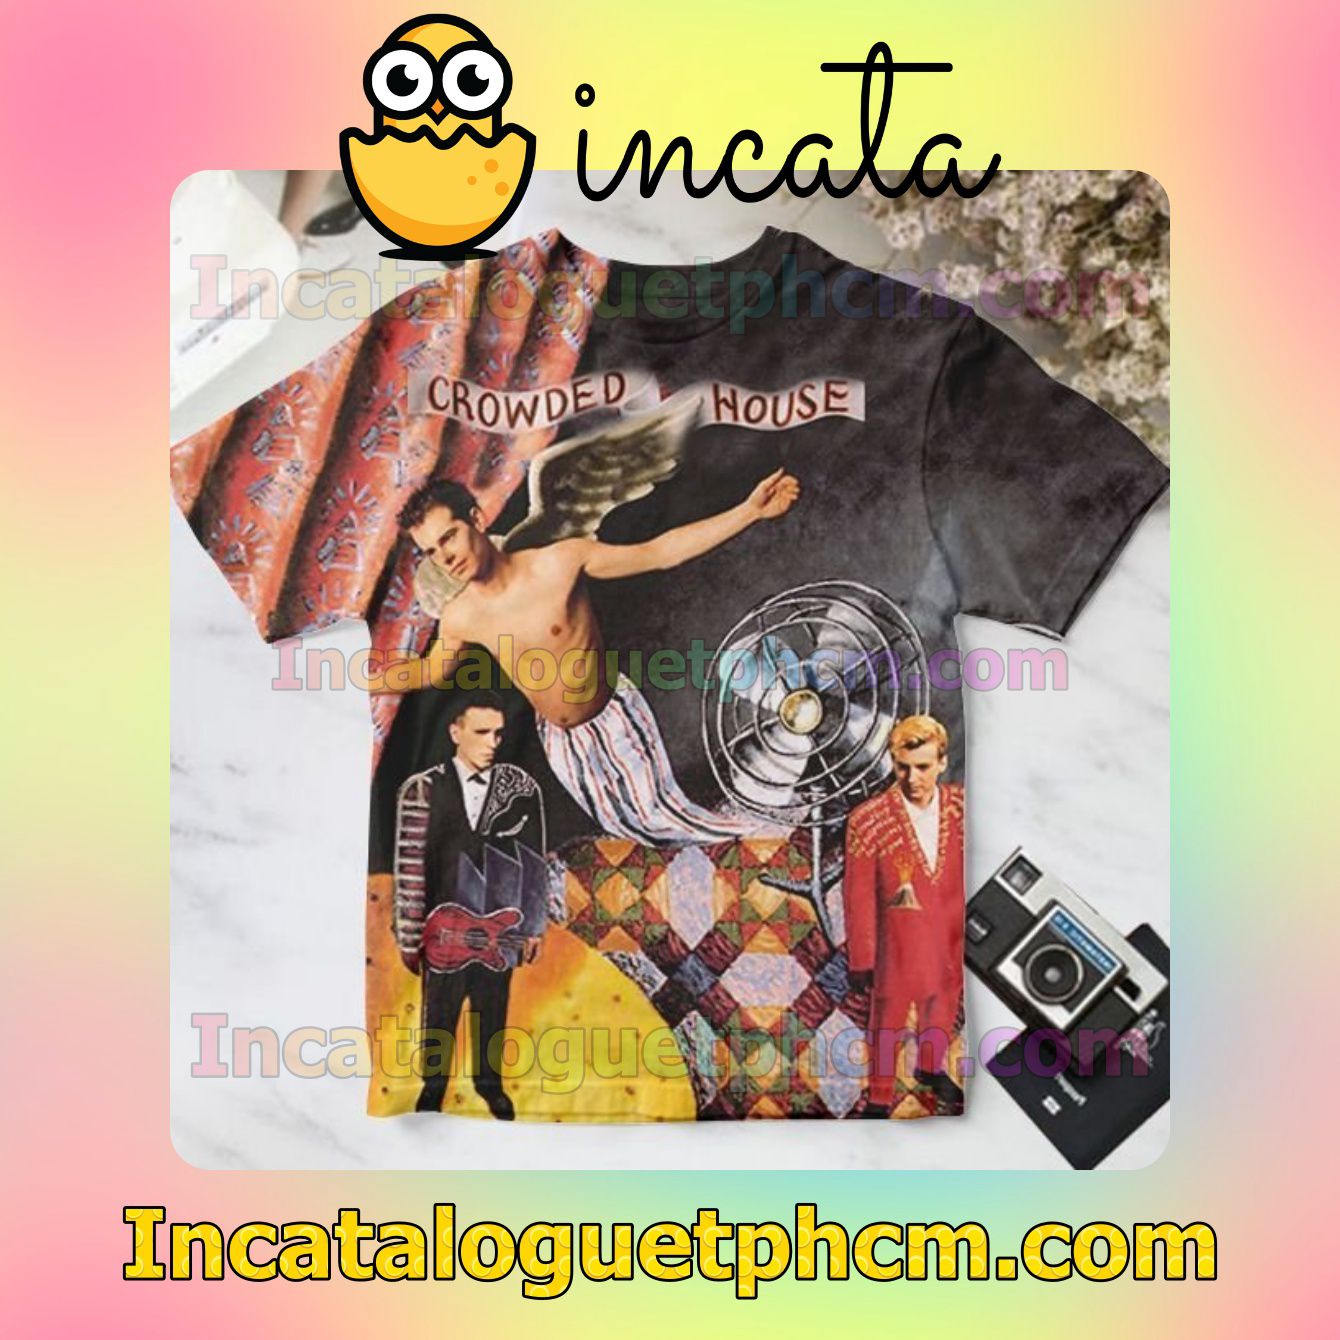 Crowded House The Debut Album Cover Personalized Shirt